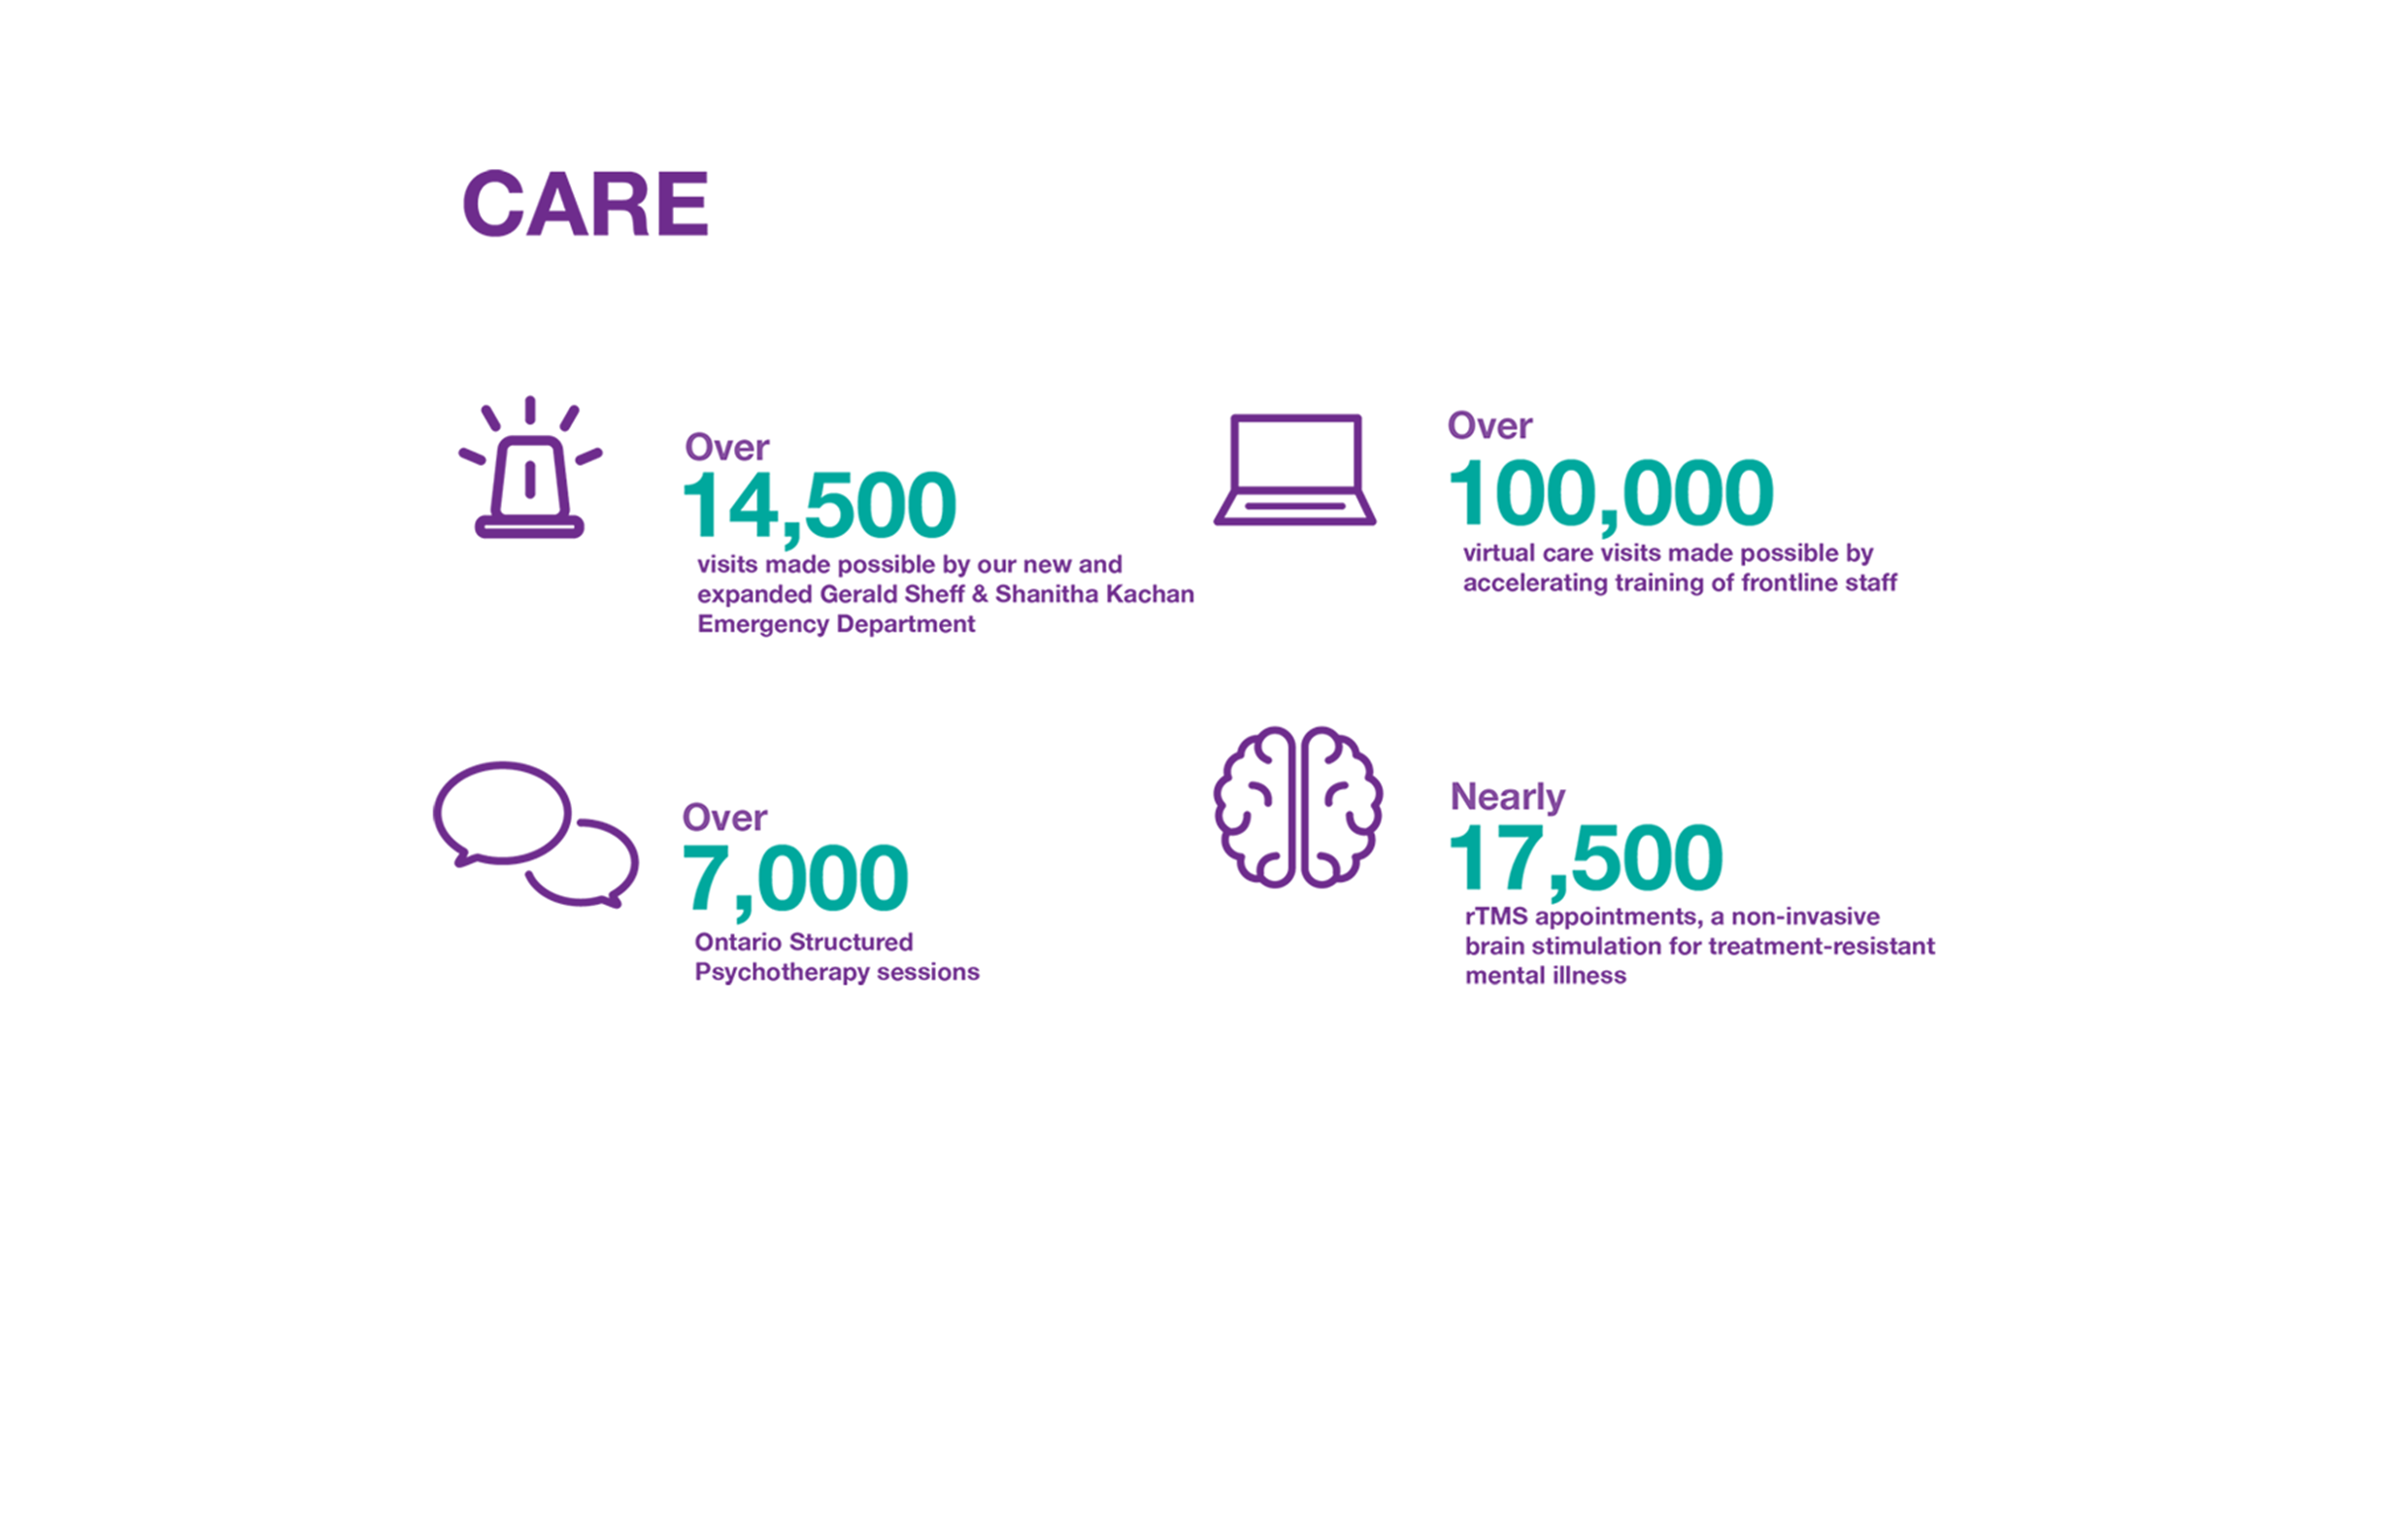 Care - CAMH By the Numbers